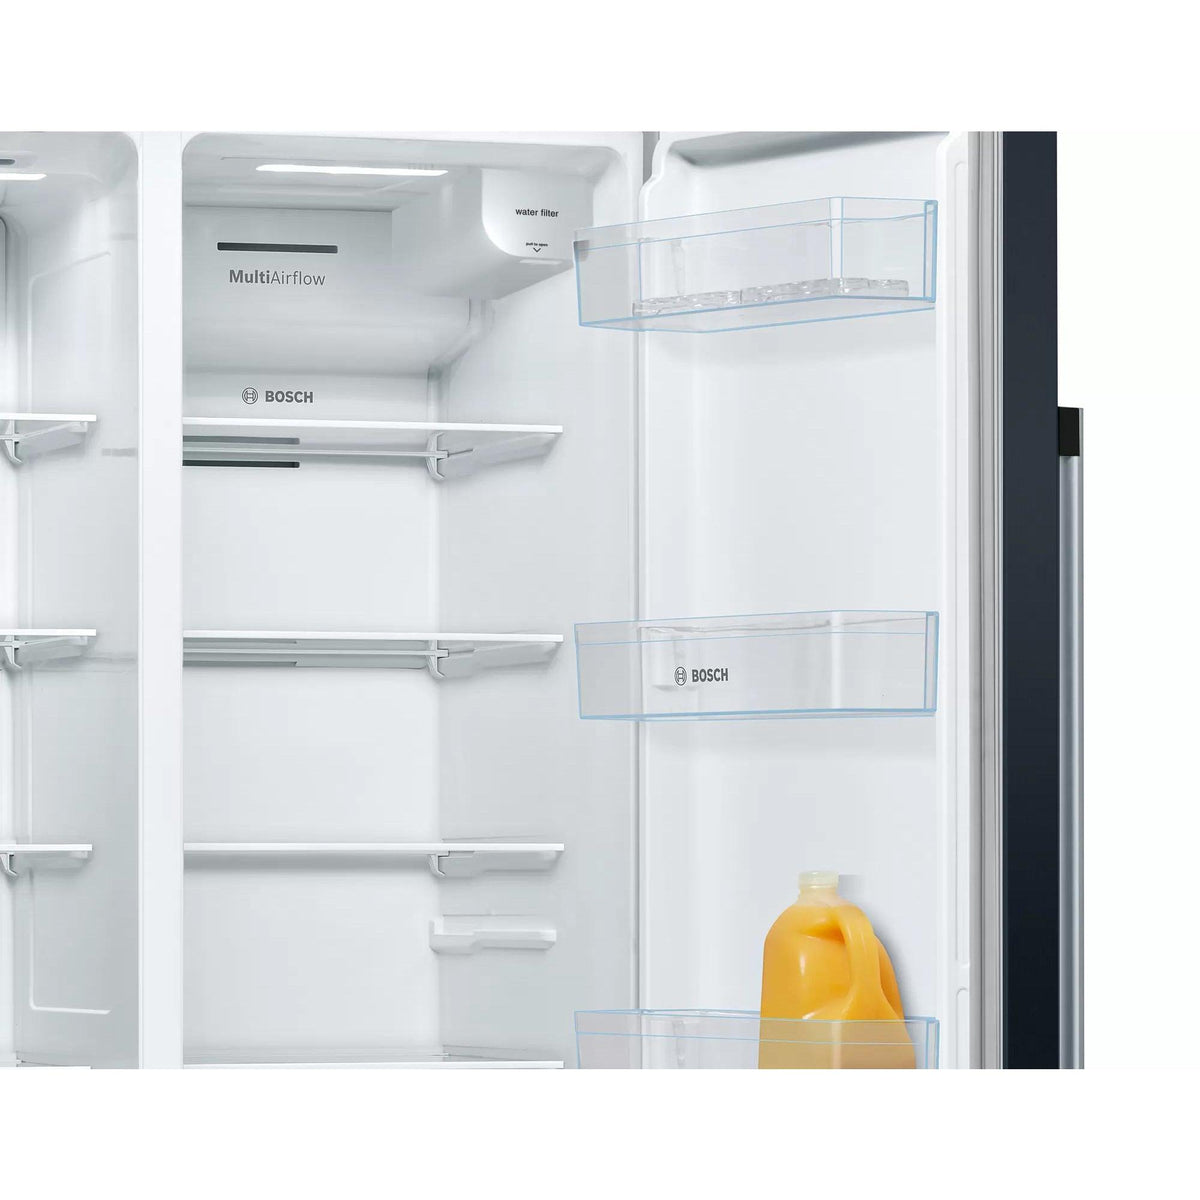 Bosch Serie 6 562L American Side by Side Fridge Freezer - Black | KAD93VBFPG from DID Electrical - guaranteed Irish, guaranteed quality service. (6977658159292)